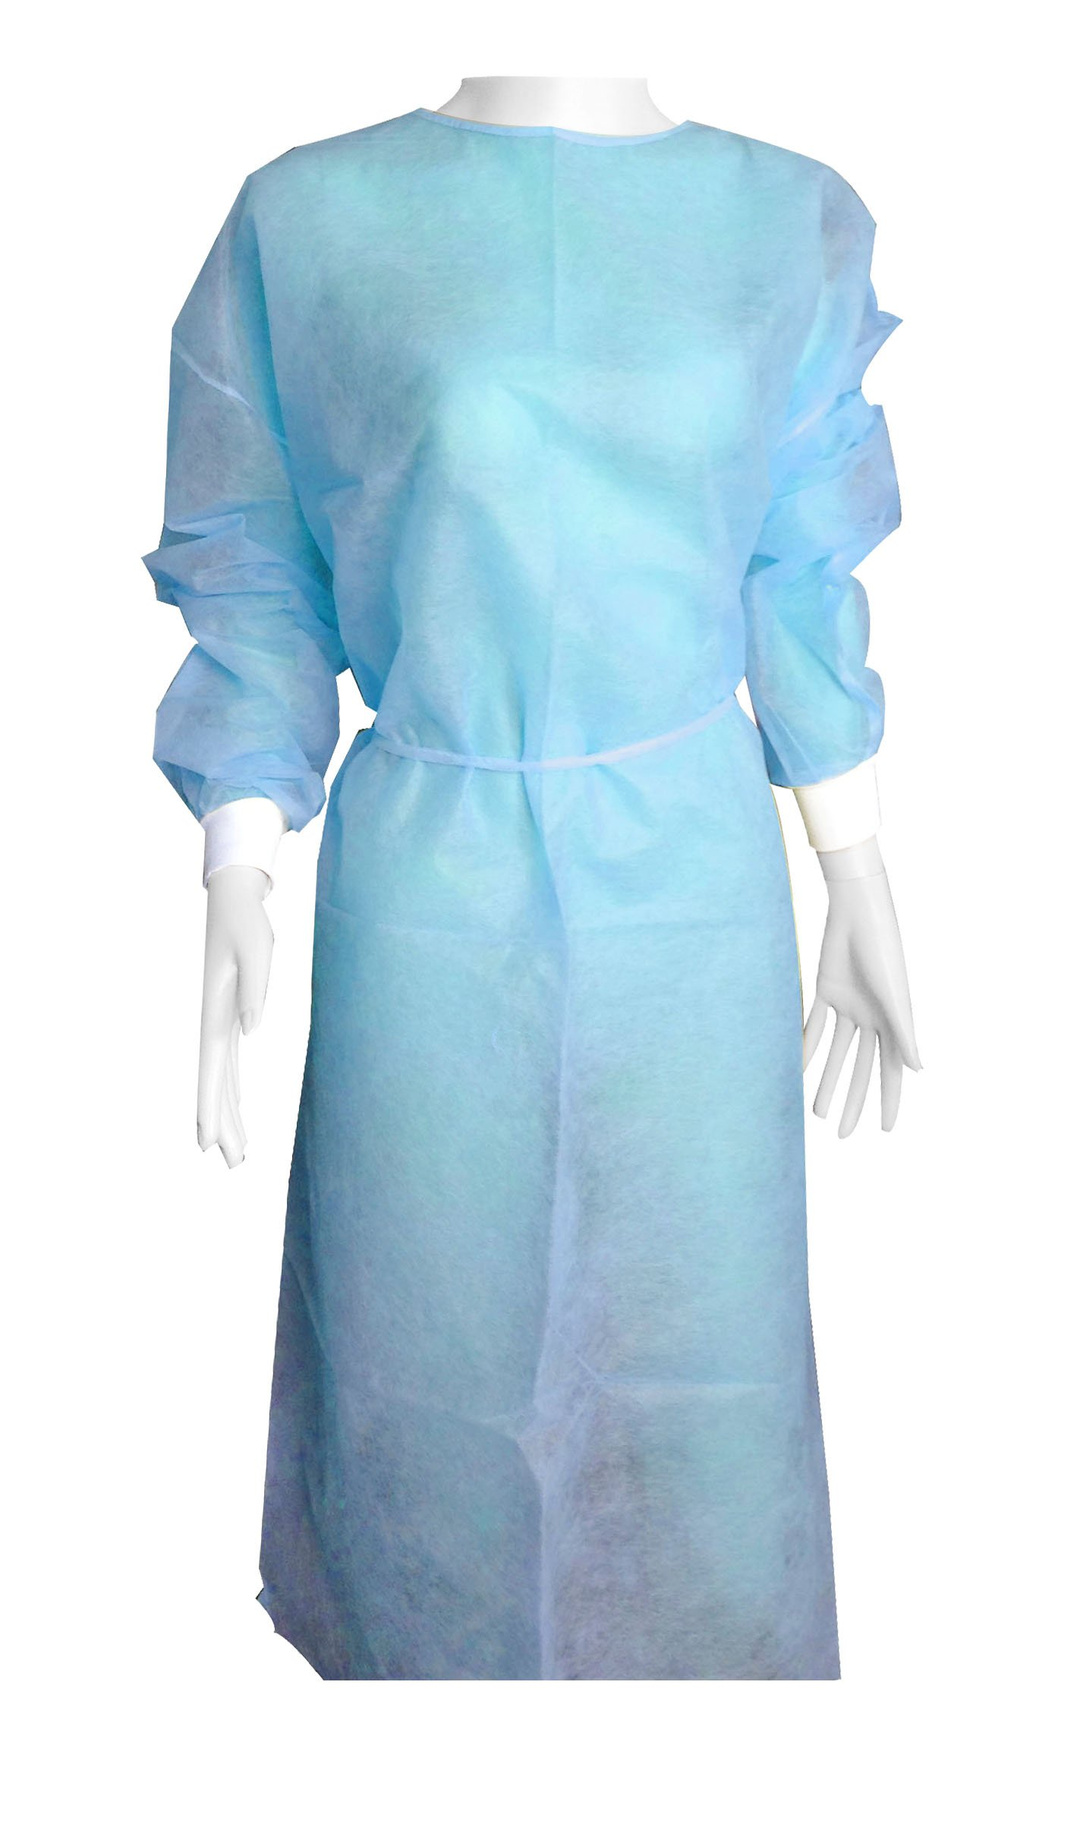 Royal Surgicare Isolation Gown SMS 35GSM Blue White Cuff Pack of 10